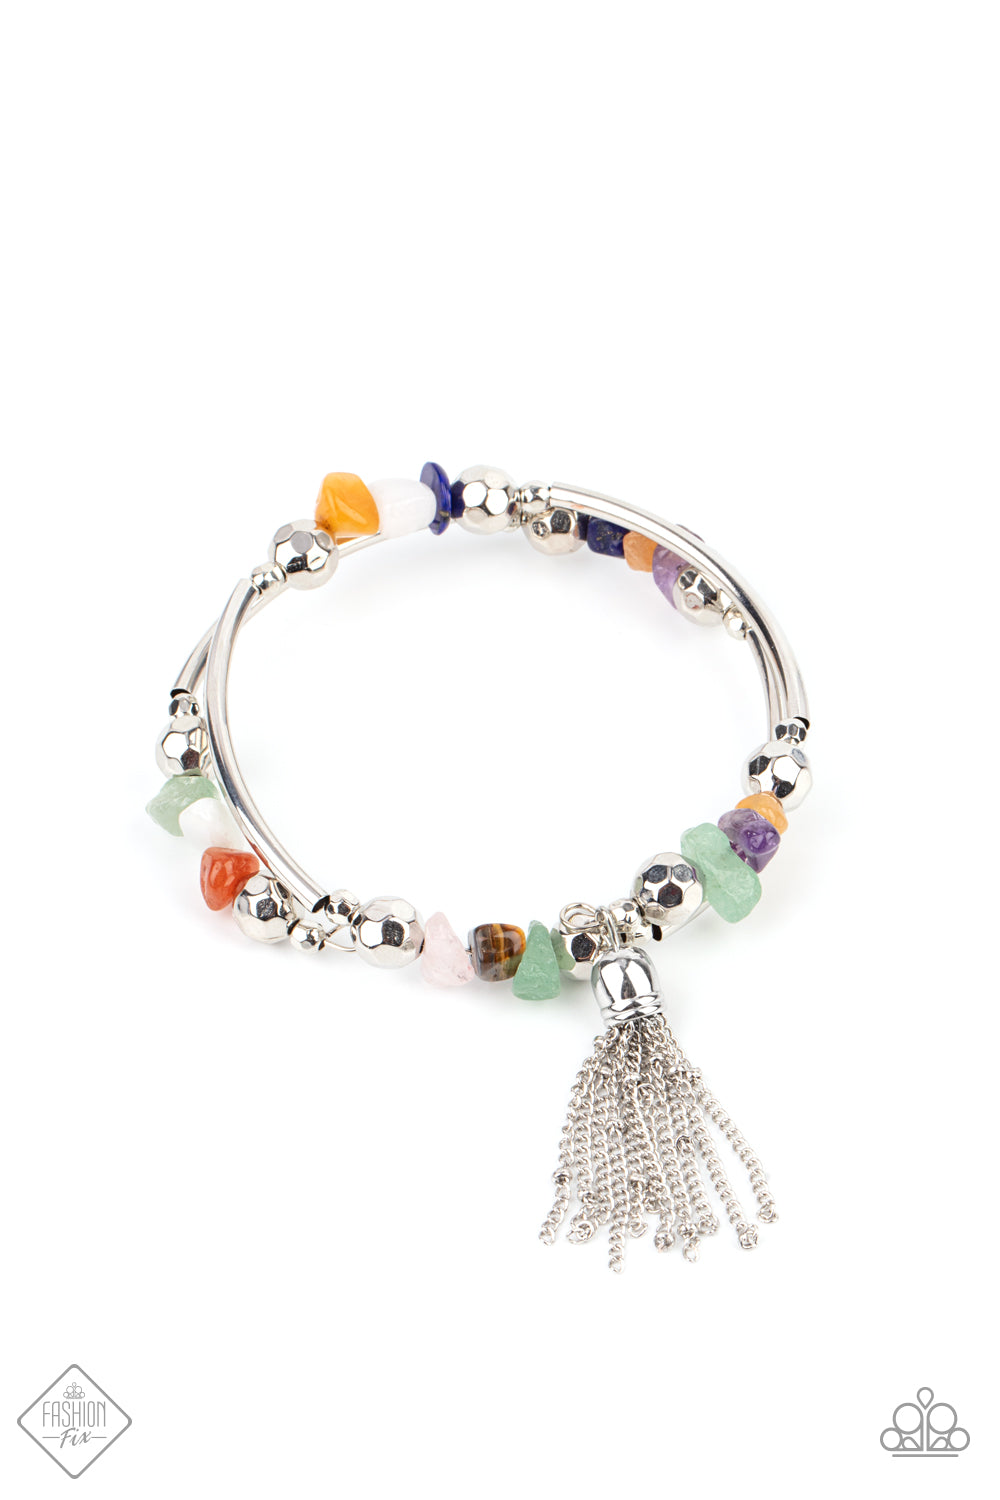 ​Mineral Mosaic - Multi Color and Silver Rock Bead Bracelet - Paparazzi Accessories - An earthy collection of silver beads, raw cut multicolored rock beads, and silver accents are threaded along a coiled wire around the wrist for a grounding pop of color. A shimmery silver chain tassel swings from one end of the spiral. Sold as one individual bracelet.